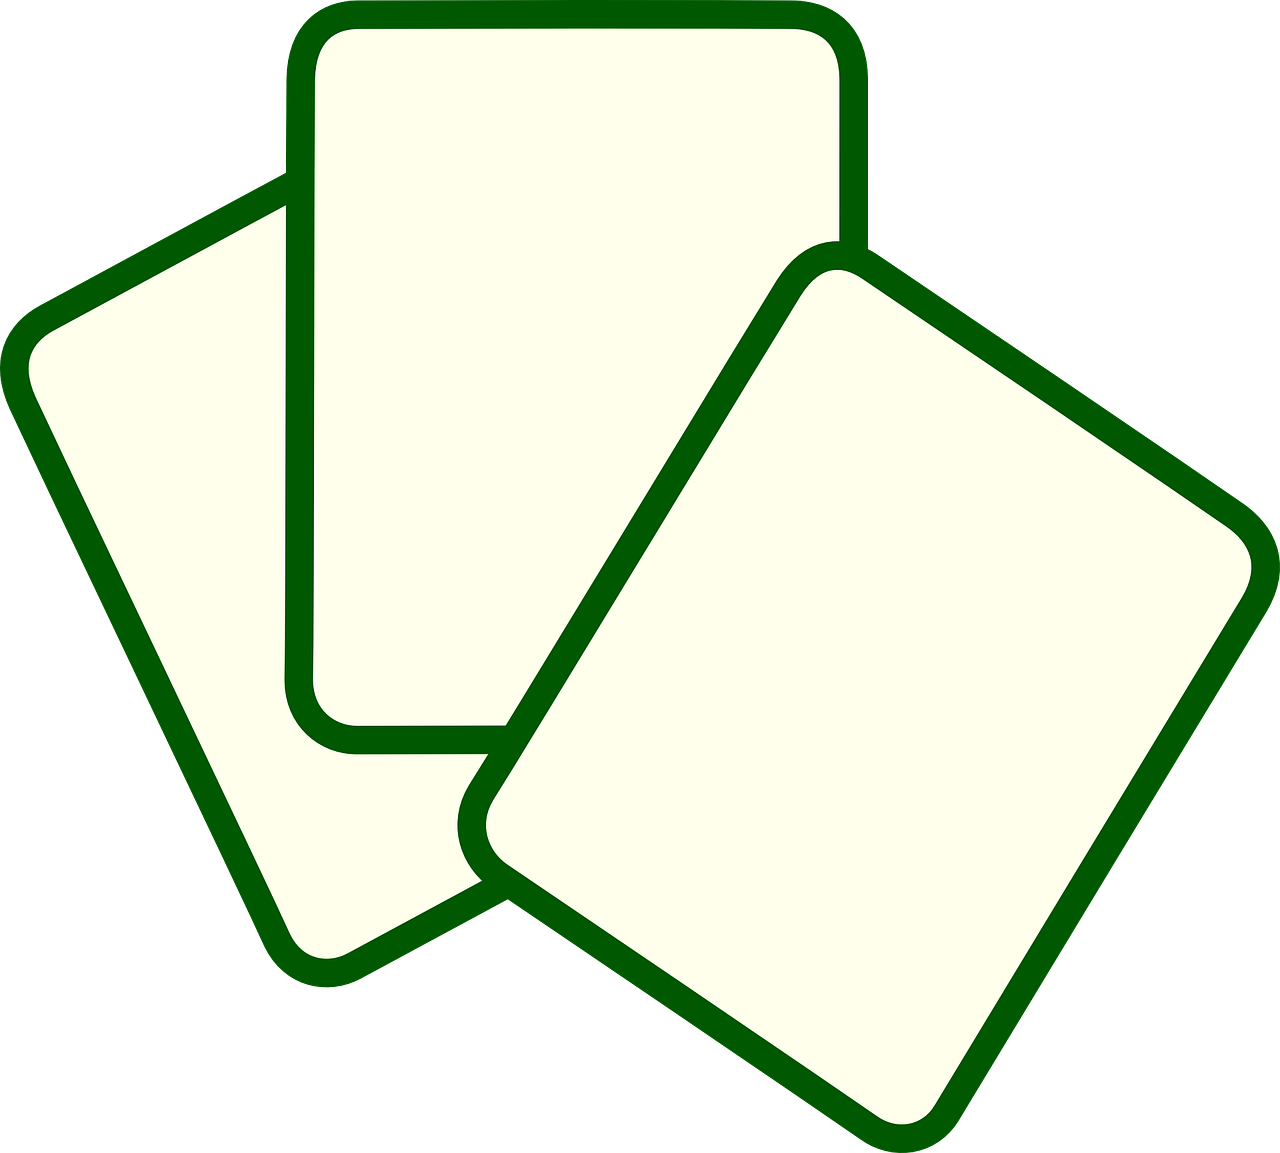 blank cards,white cards,business cards,playing cards,free vector graphics,free pictures, free photos, free images, royalty free, free illustrations, public domain